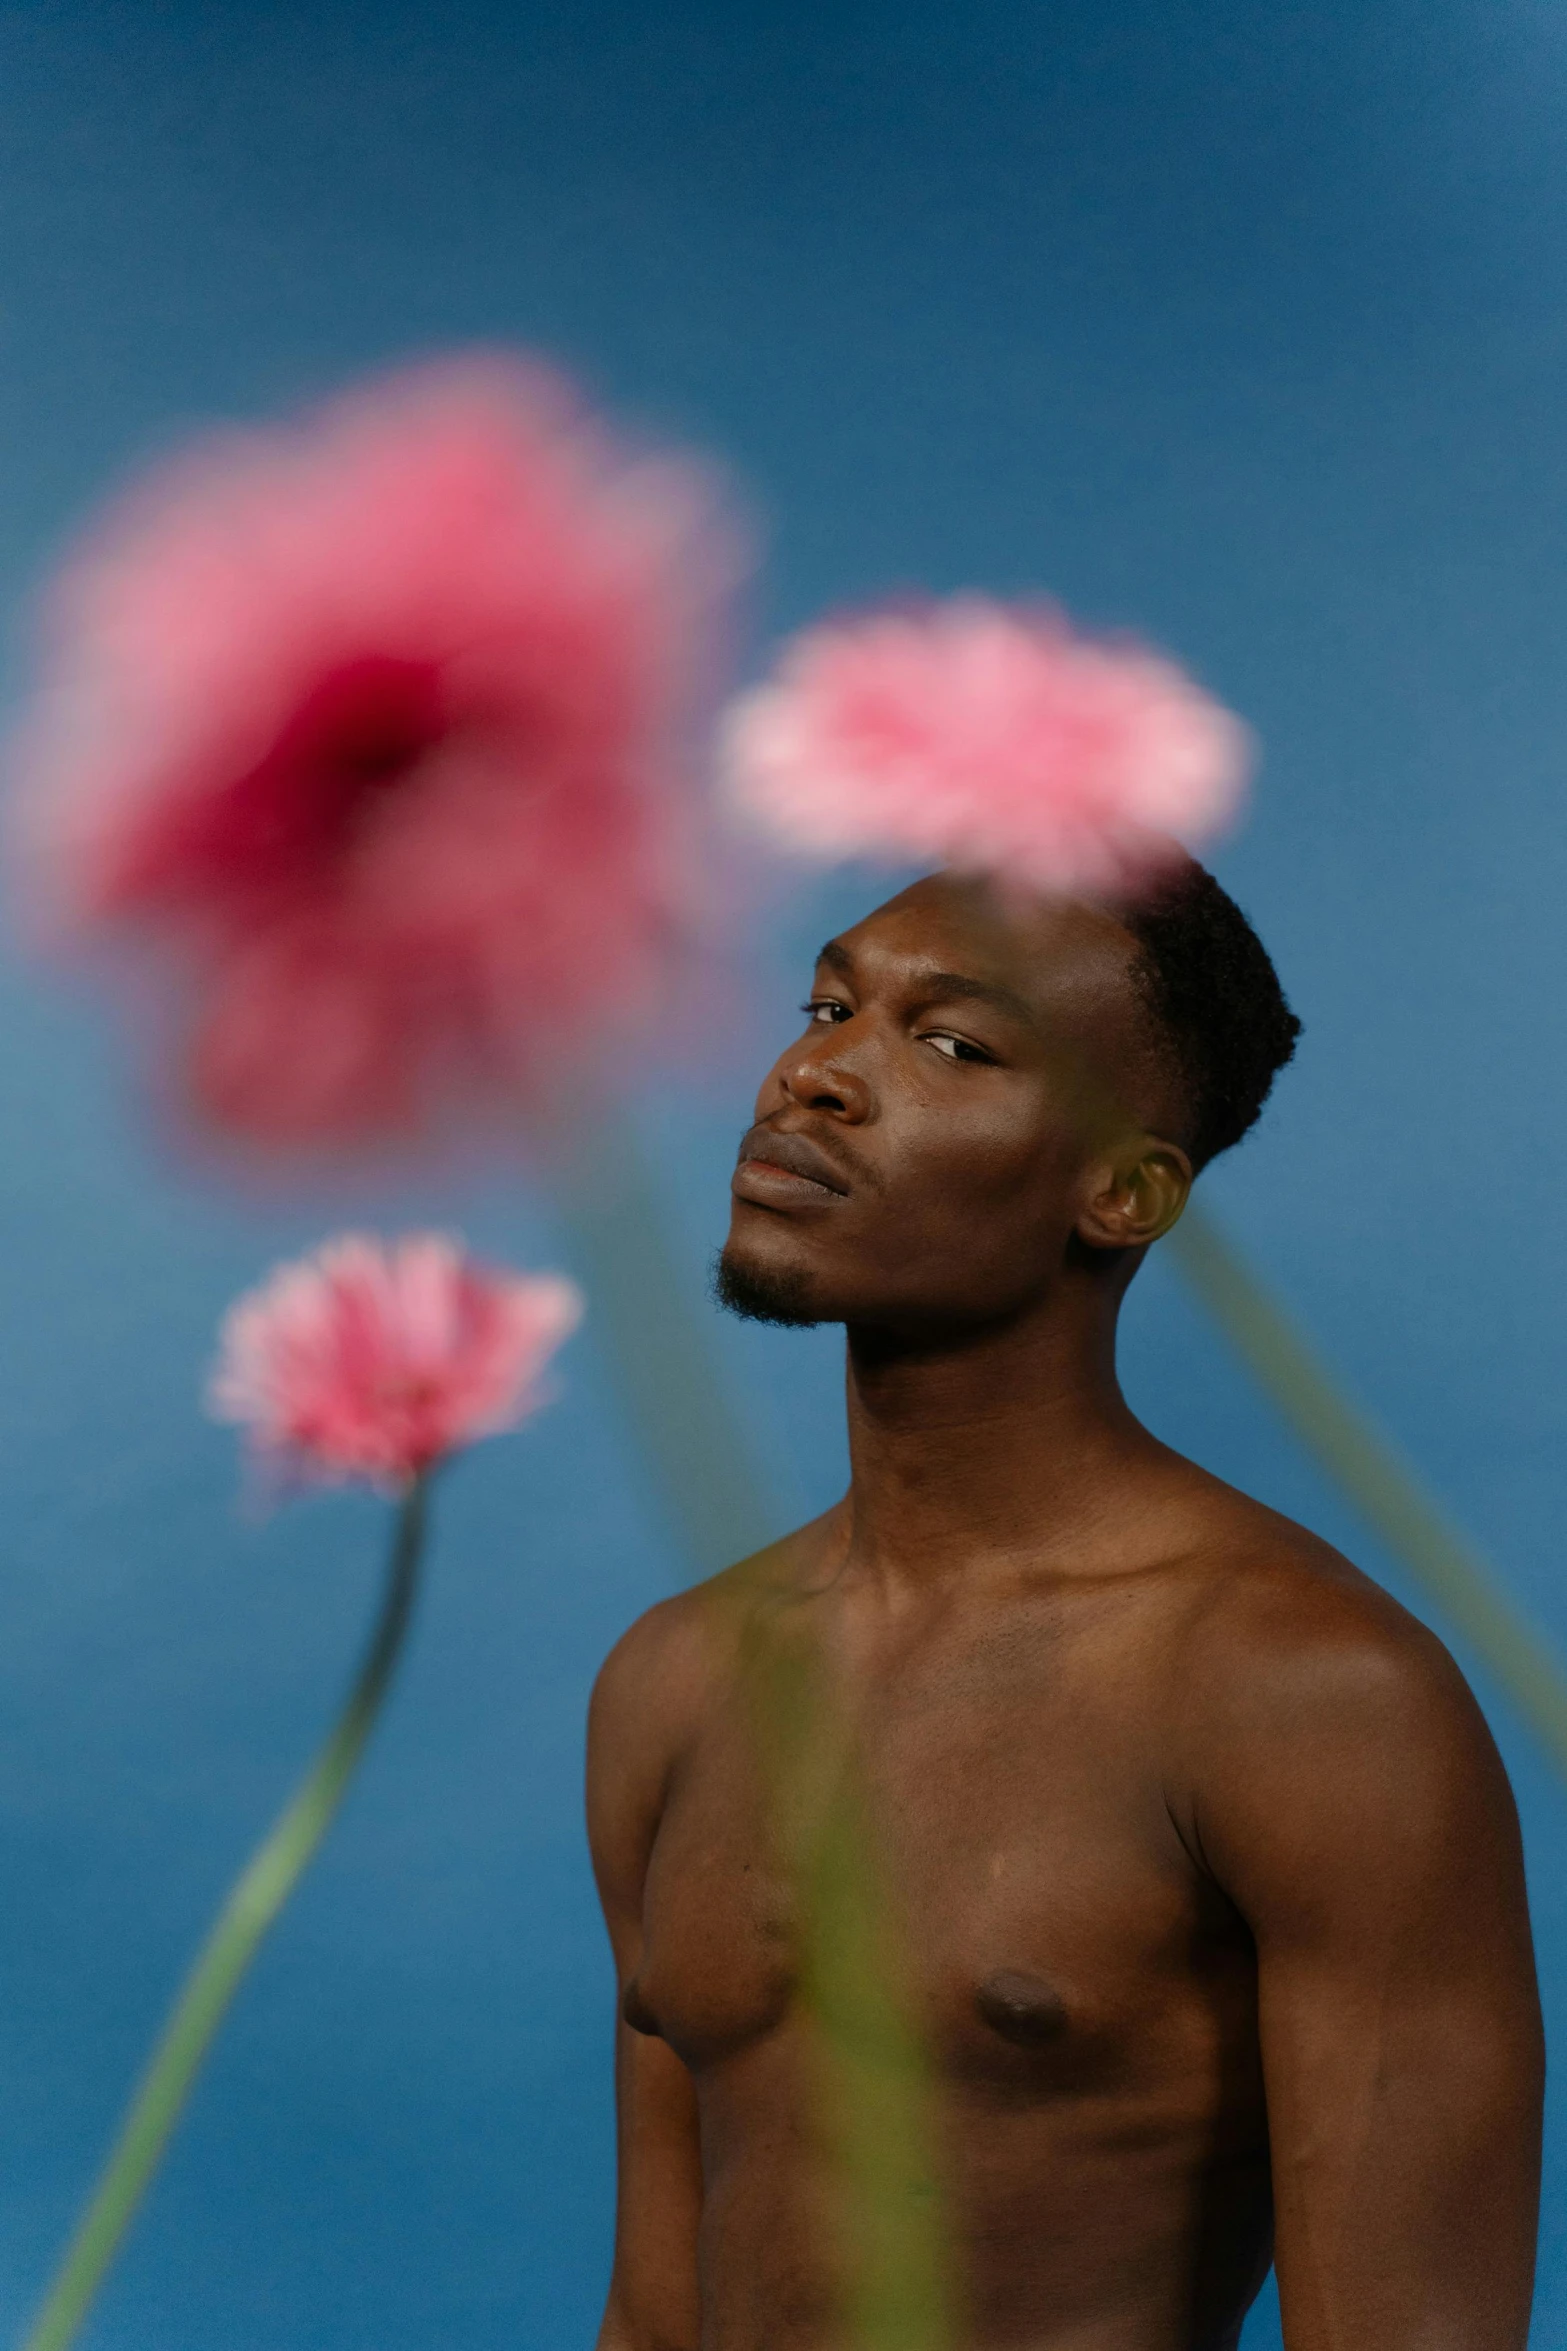 the black man is looking up to the pink flower